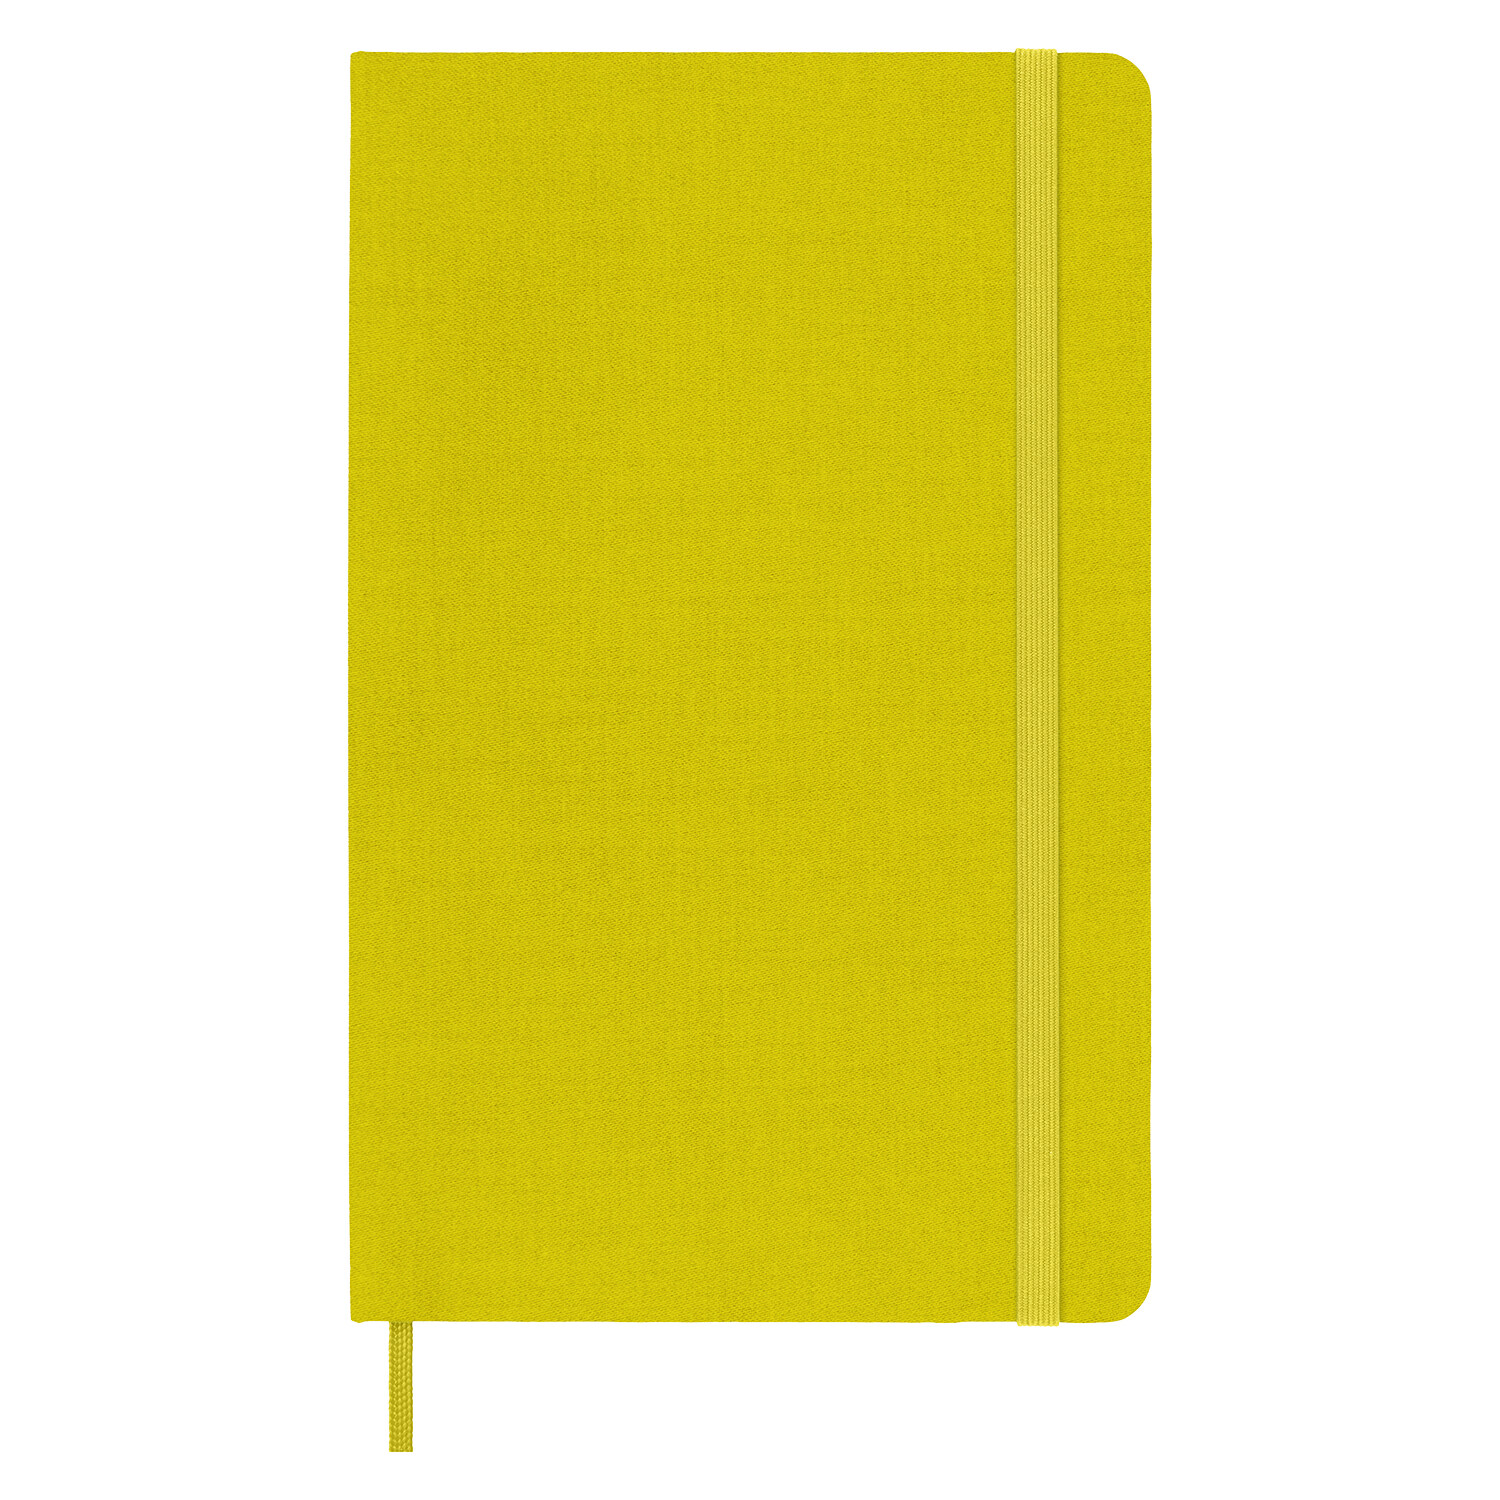 Moleskine Classic Notebook, Large, Ruled, Hay Yellow, Silk Hard Cover (5 X 8.25) (Hardcover)